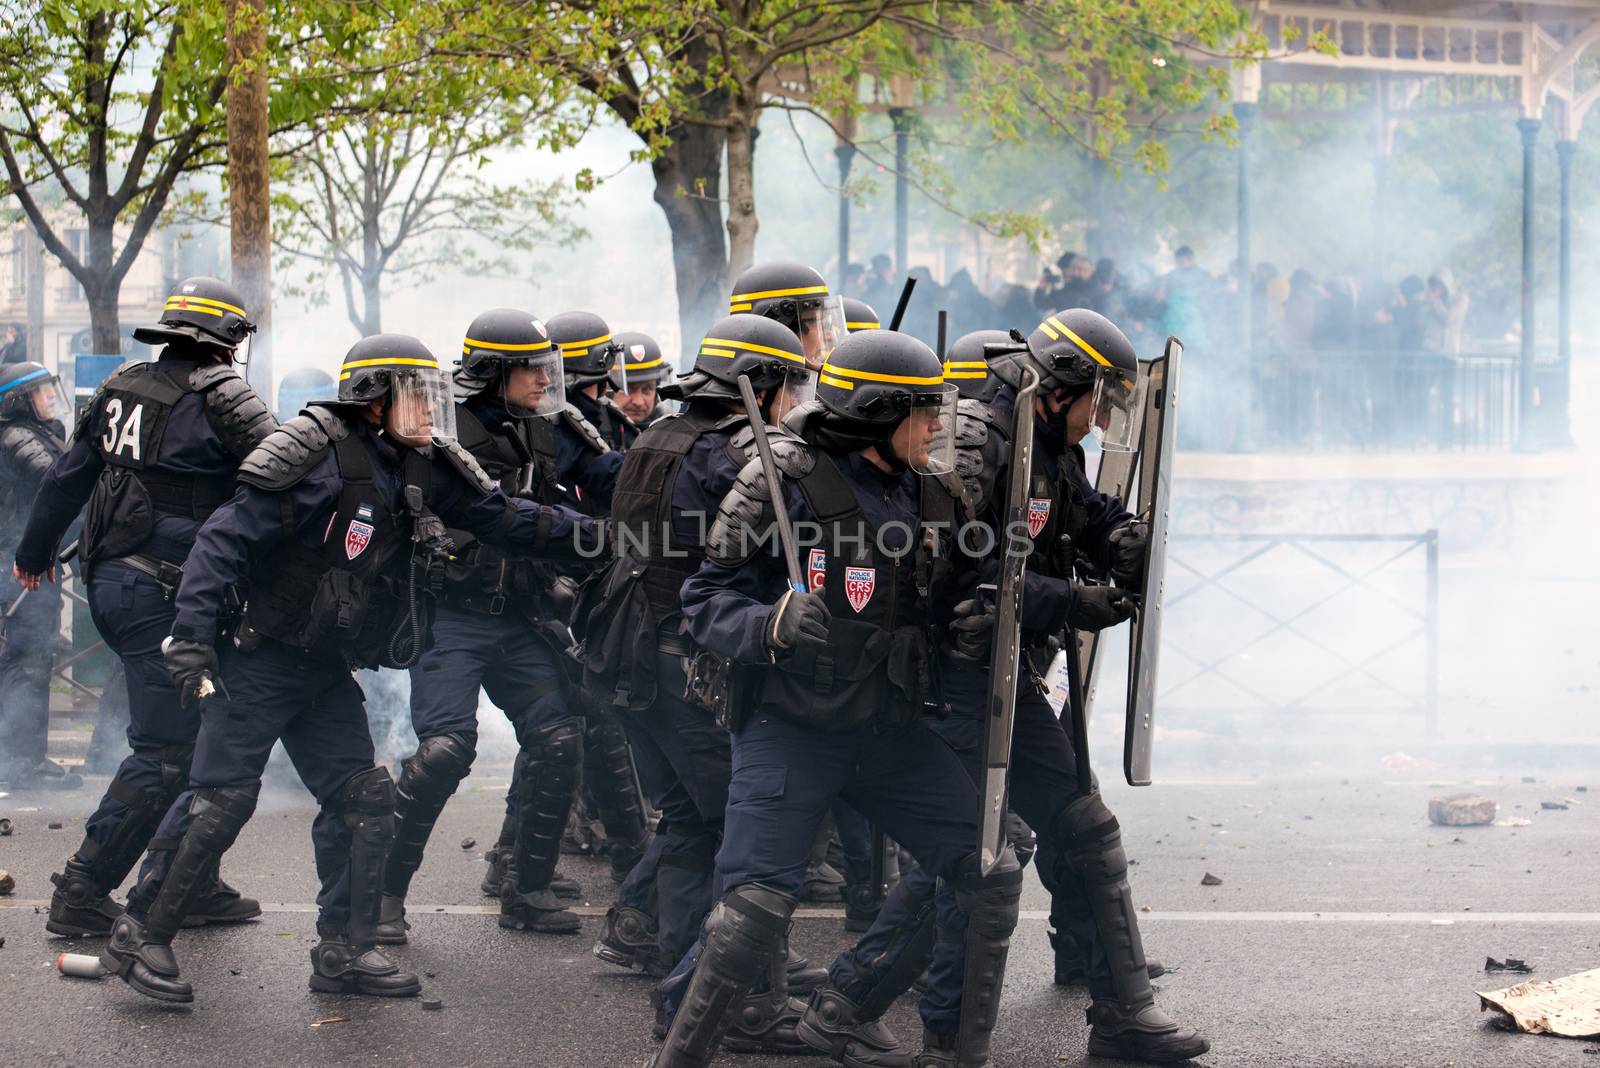 FRANCE, Paris: Riot policemen gather to face violent protesters during a demo on April 9, 2016 in Paris, against the French government's proposed labour law reforms.